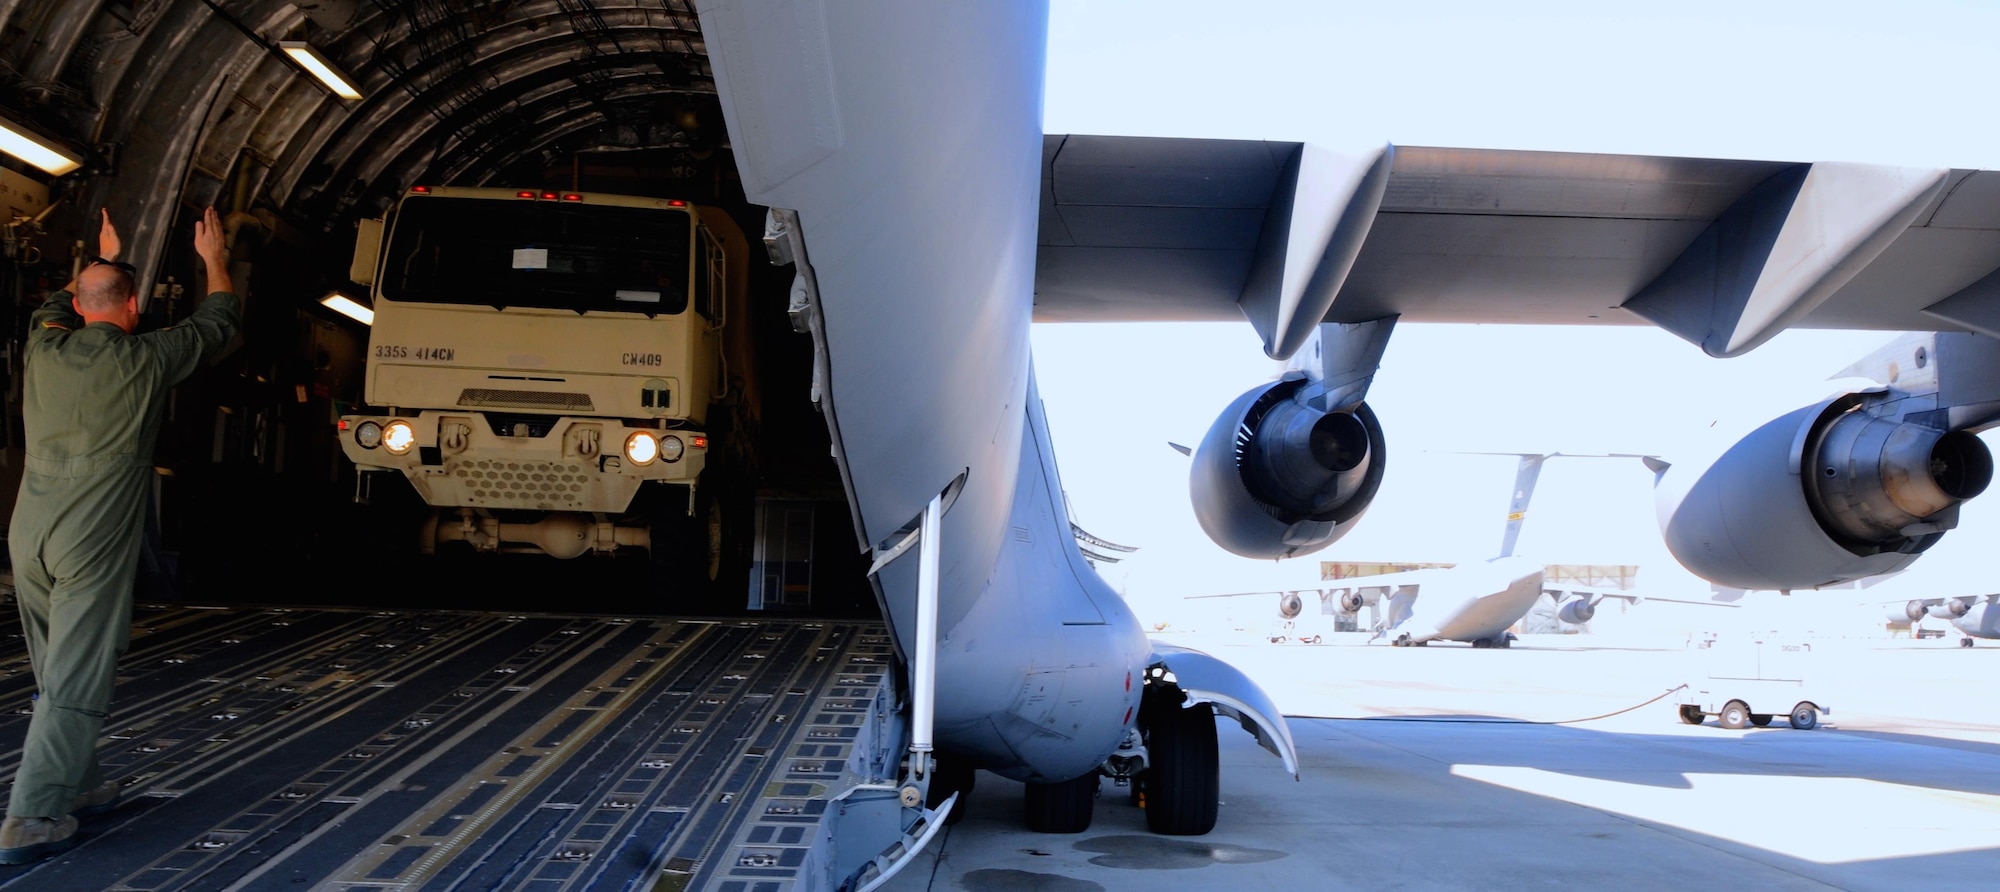 Senior Airman Scott Guerin a Loadmaster with the 317th Airlift Squadron based in Charleston, S.C., directs a Soldier of the 415th Chemical Brigade driving a Light Medium Tactical Vehicle LMTV into the cargo bay of a Boeing C-17 Globe master on Aug. 15, 2015, in support of Operation Red Dragon. Red Dragon is a Civil Defense readiness exercise, which incorporates Army Reserve and National Guard Soldiers. (U.S. Army photo by Sgt. Eben Boothby)